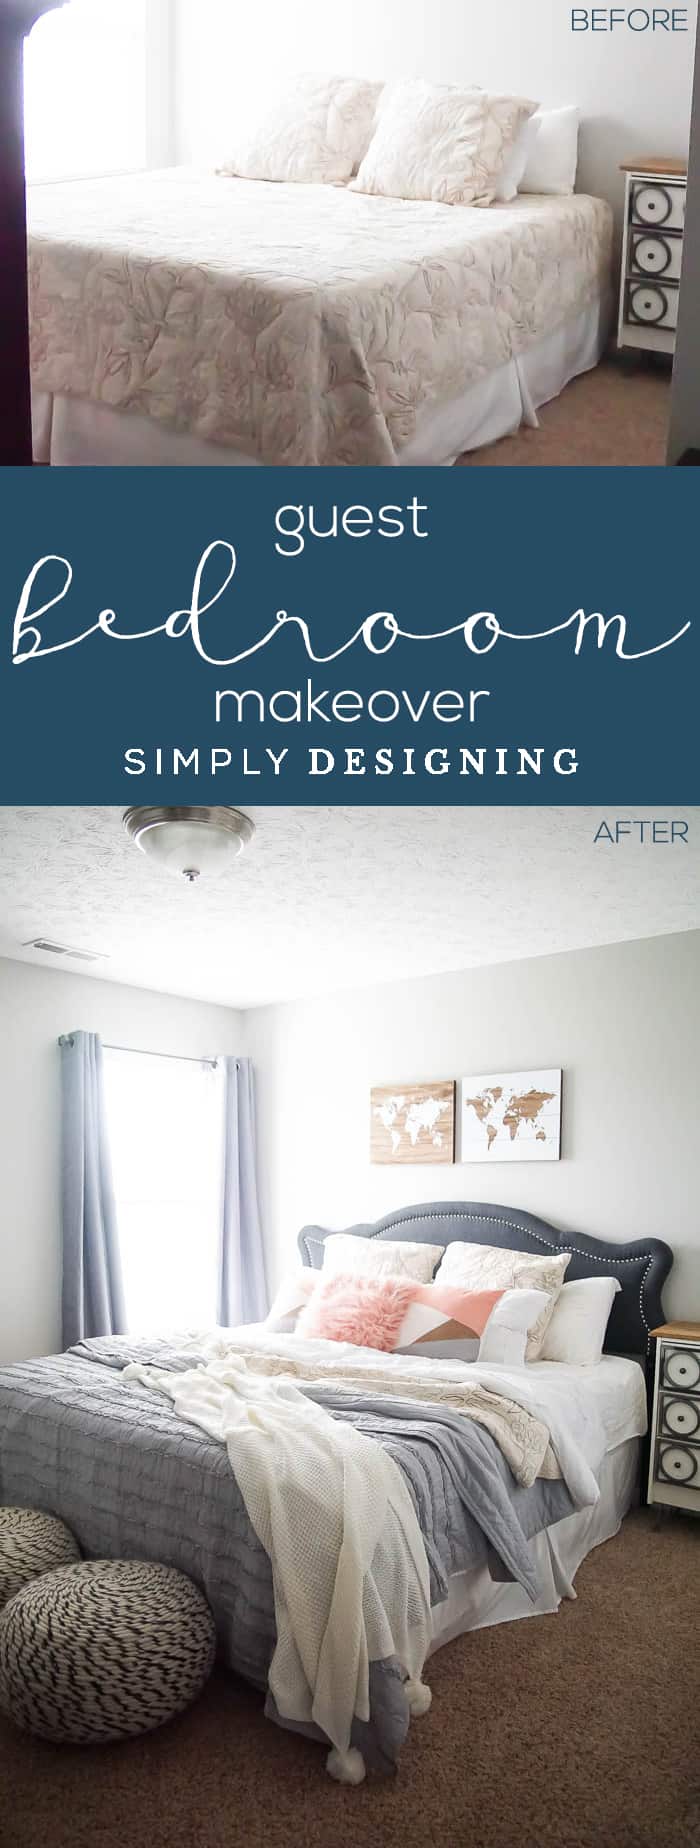 Guest Bedroom Makeover - before and after